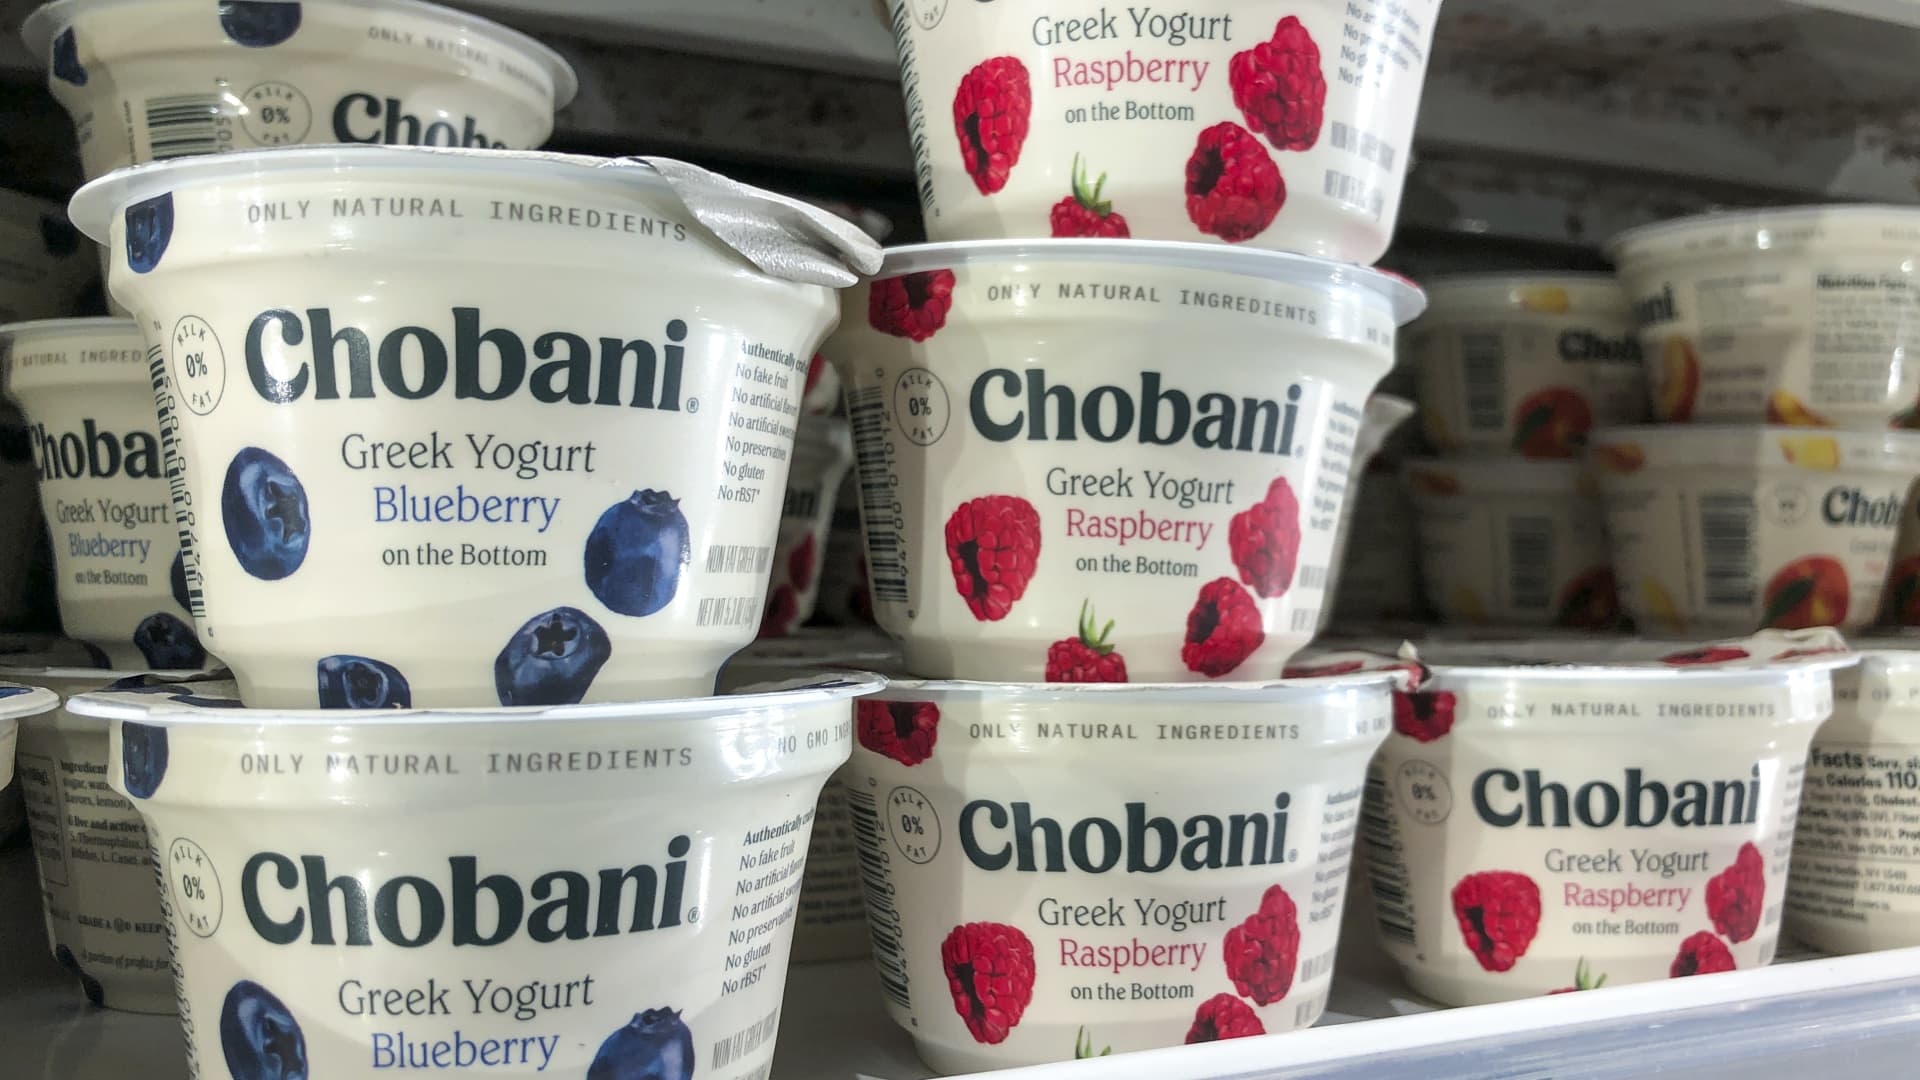 Chobani withdraws IPO plans after yogurt maker filed to go public in November